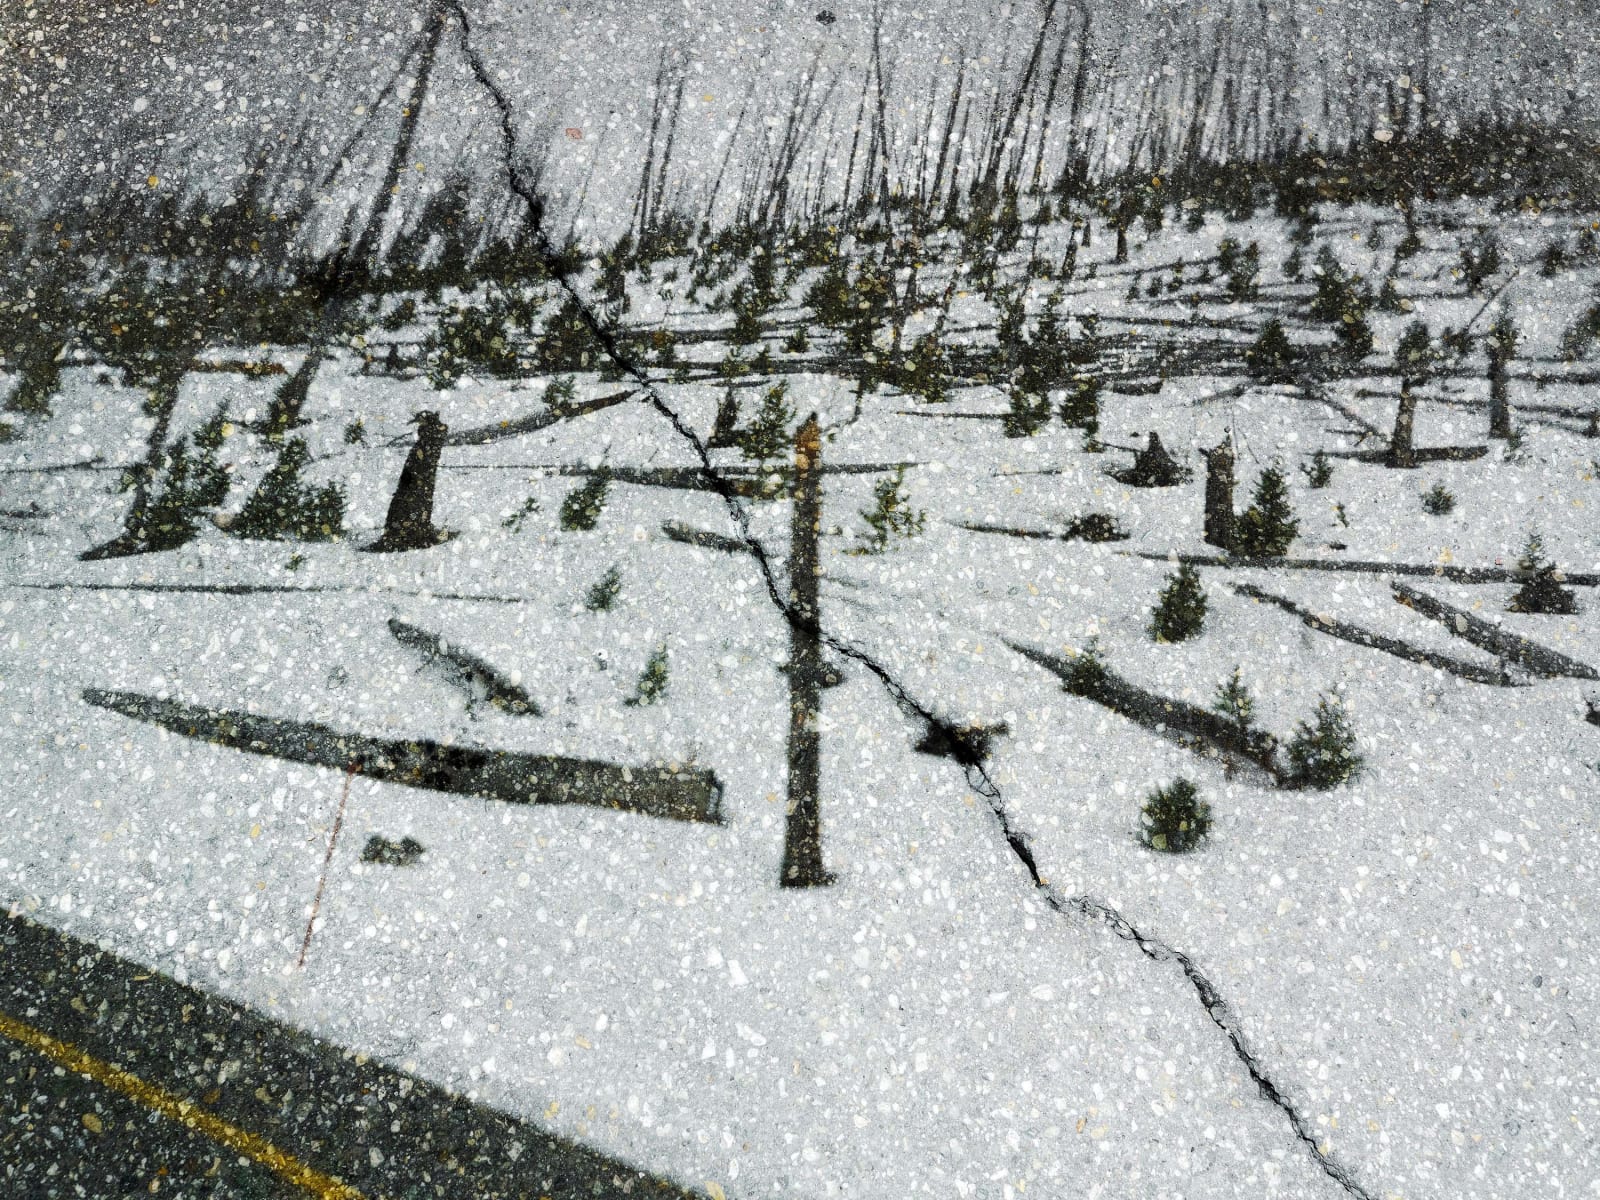 Abelardo Morell Tent Camera Image on Ground View of Tower Hill Yellowstone National Park Wyoming snow on ground in burnt forest with crack in pavement